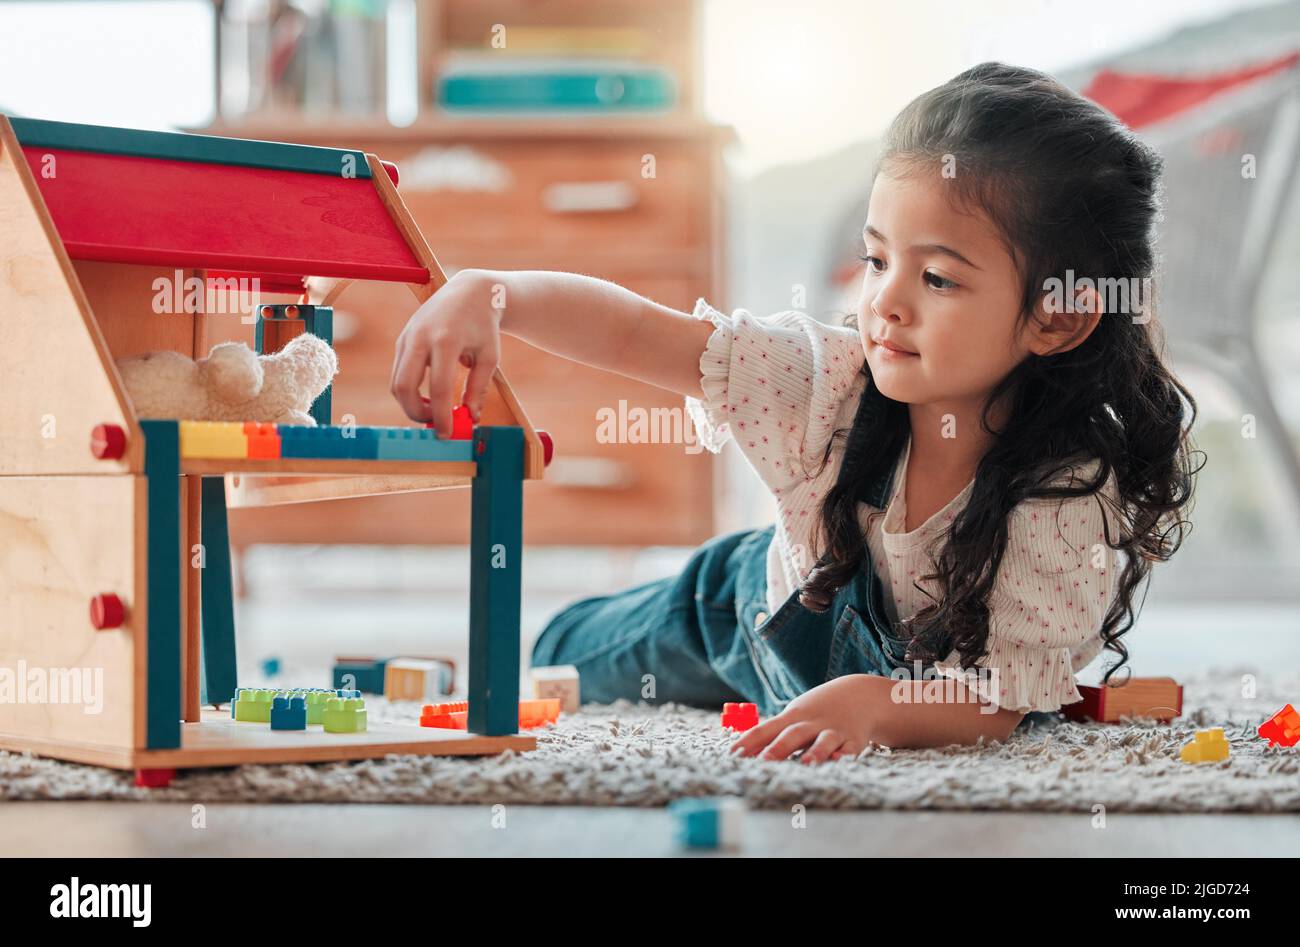 Ill make it more cozy for you Teddy. an adorable little girl playing a dollhouse. Stock Photo